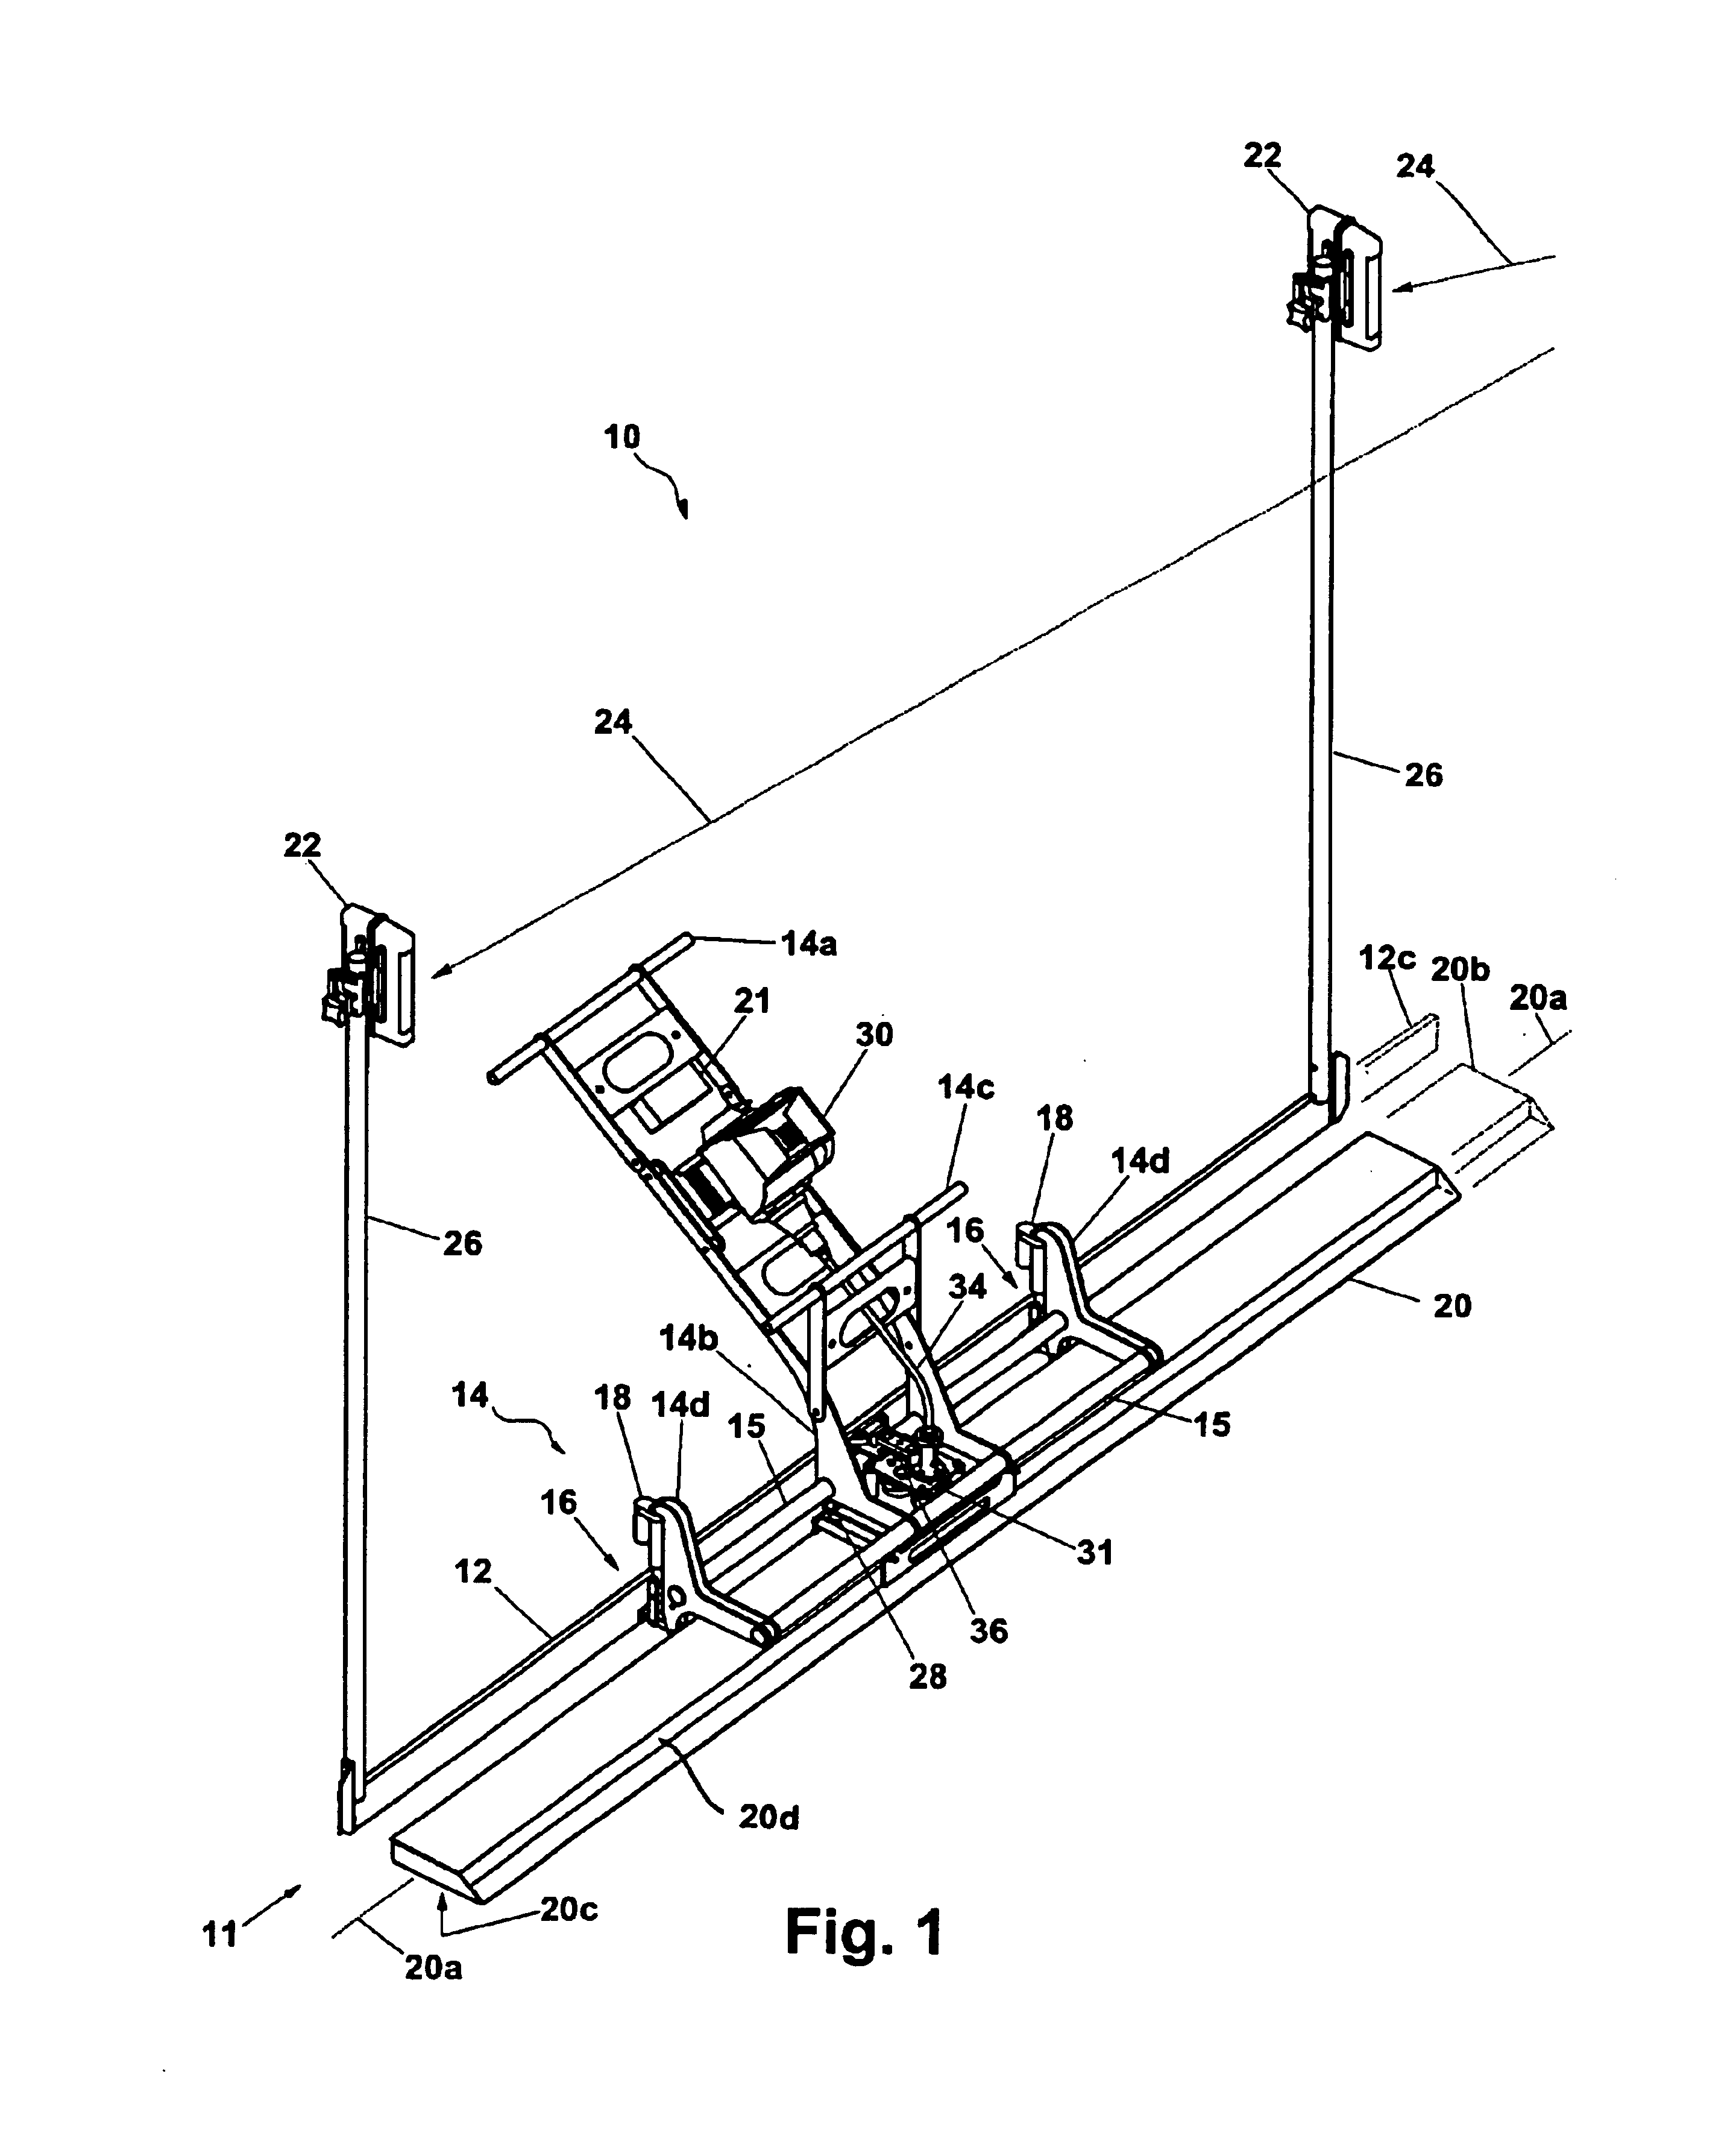 Light weight apparatus for screeding and vibrating uncured concrete surfaces